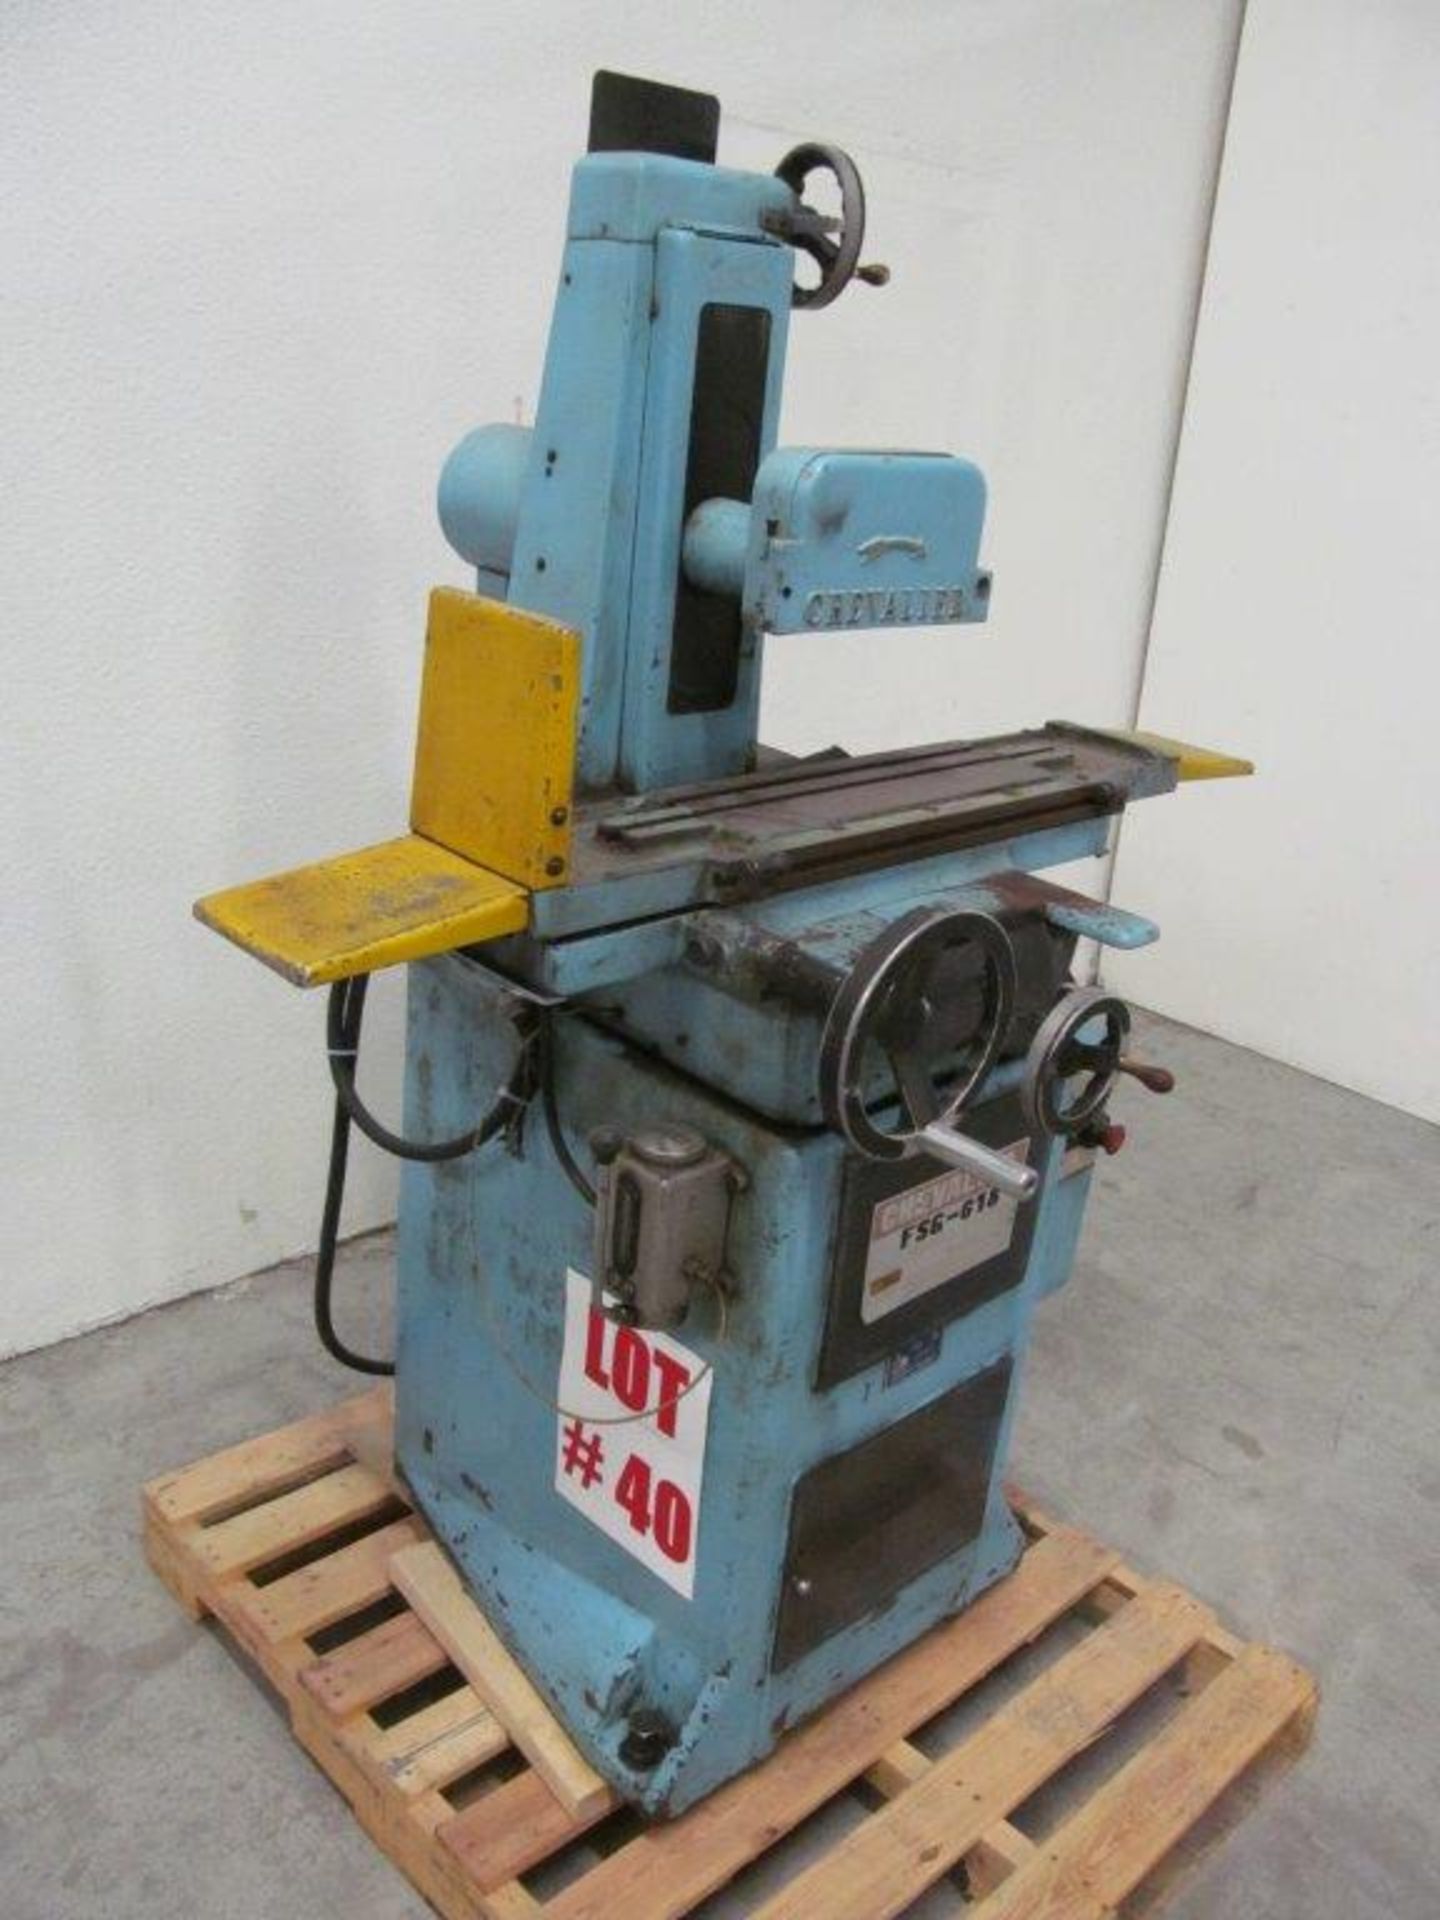 CHEVALIER FSG-618 SURFACE GRINDER, 6" X 18", ELECTRICS: 550V/3PH/60C, "CONDITION UNKNOWN"